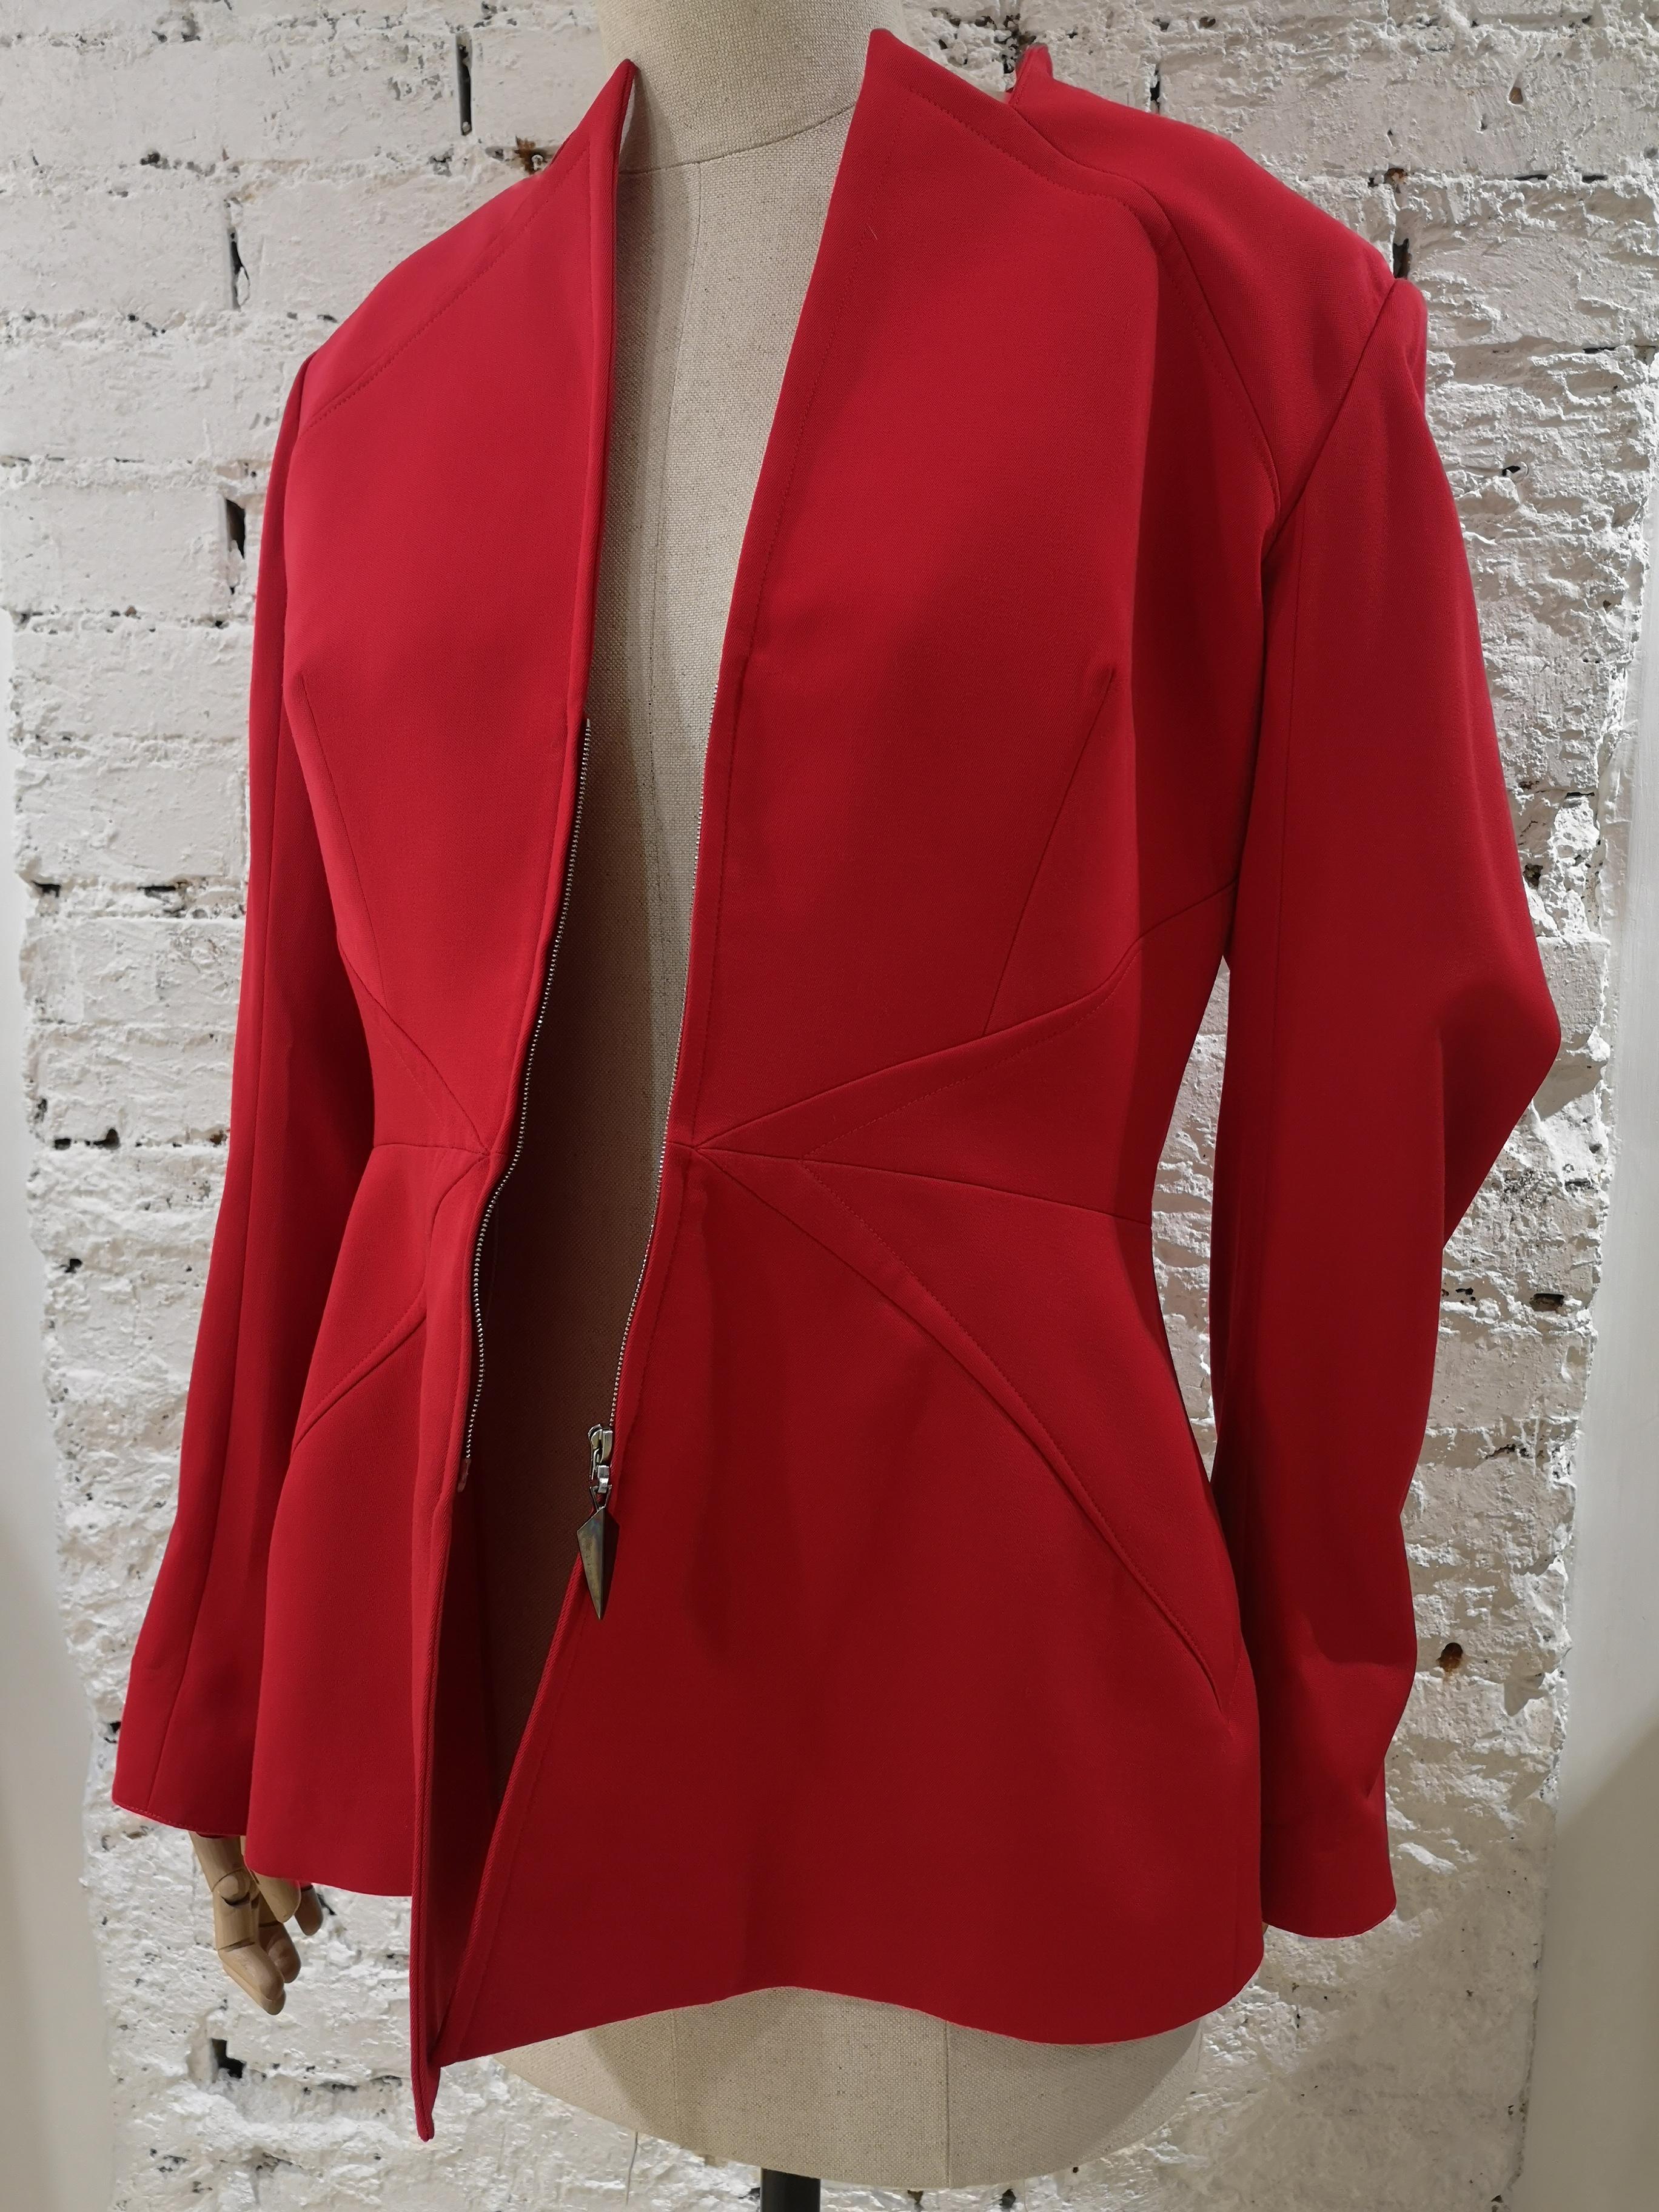 Thierry Mugler Red Jacket For Sale 7